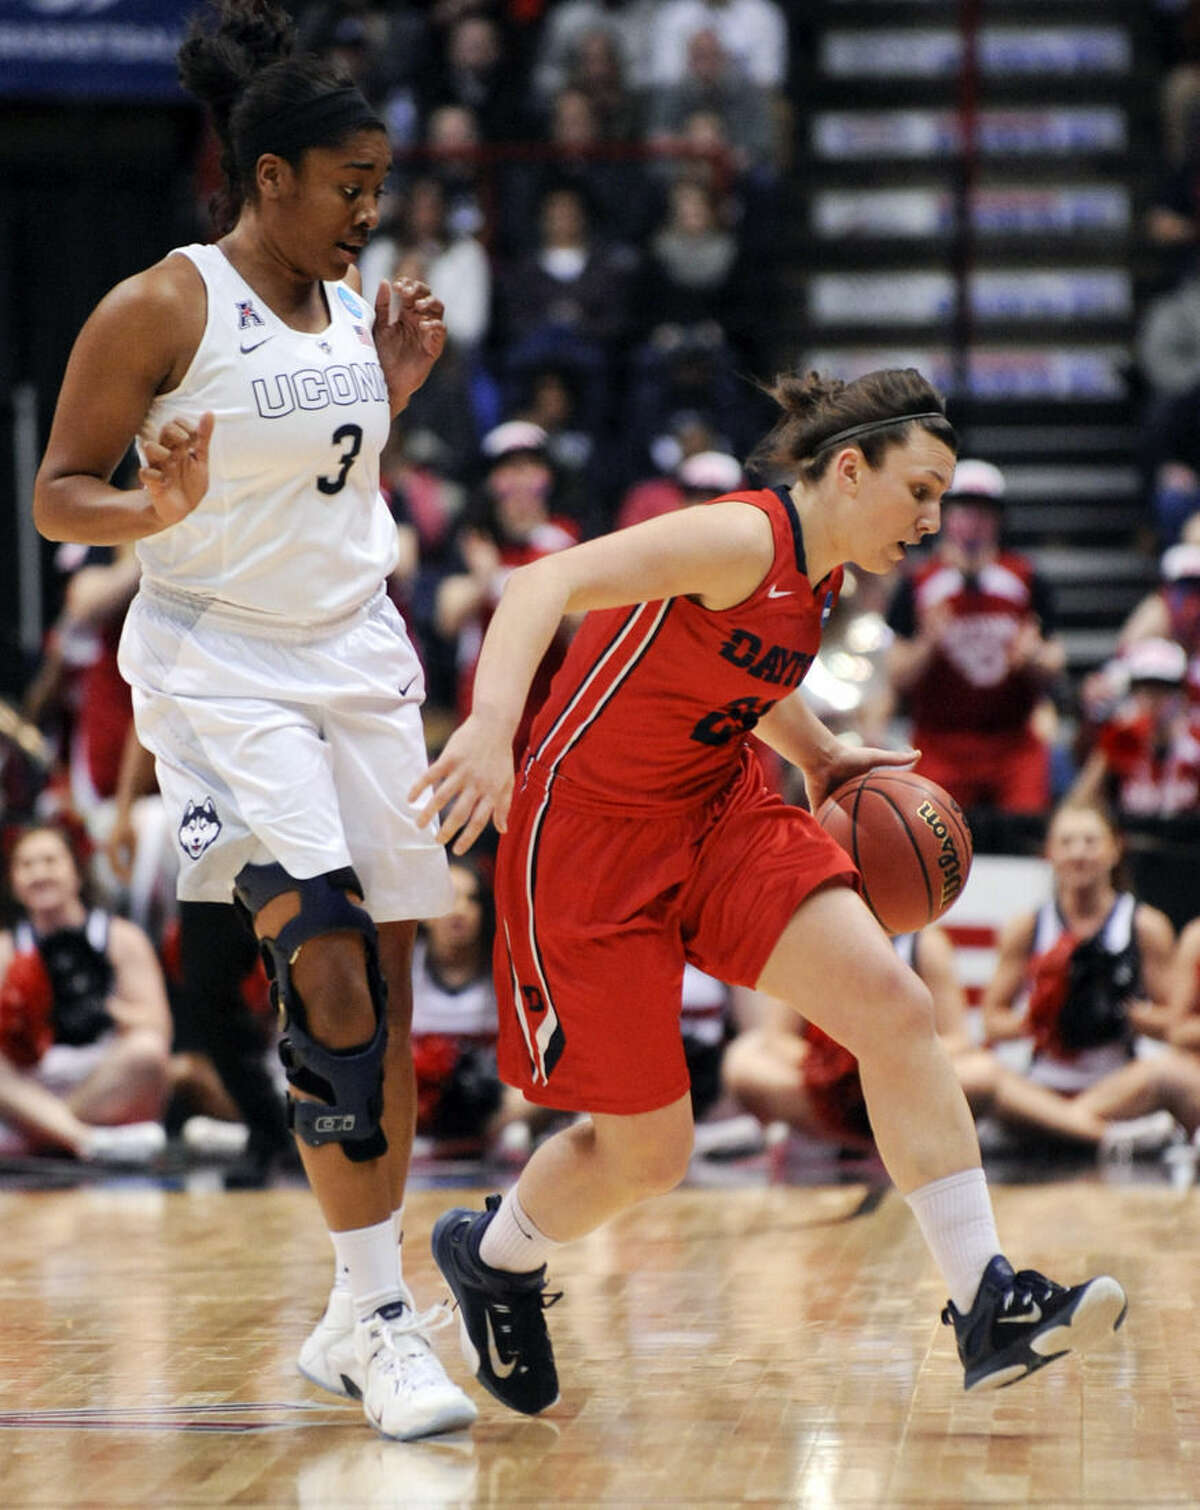 Dayton guard Andrea Hoover, right, dribbles past Connecticut forward Morgan Tuck (3) during the first half of a regional final game in the NCAA women's college basketball tournament on Monday, March 30, 2015, in Albany, N.Y. (AP Photo/Tim Roske)